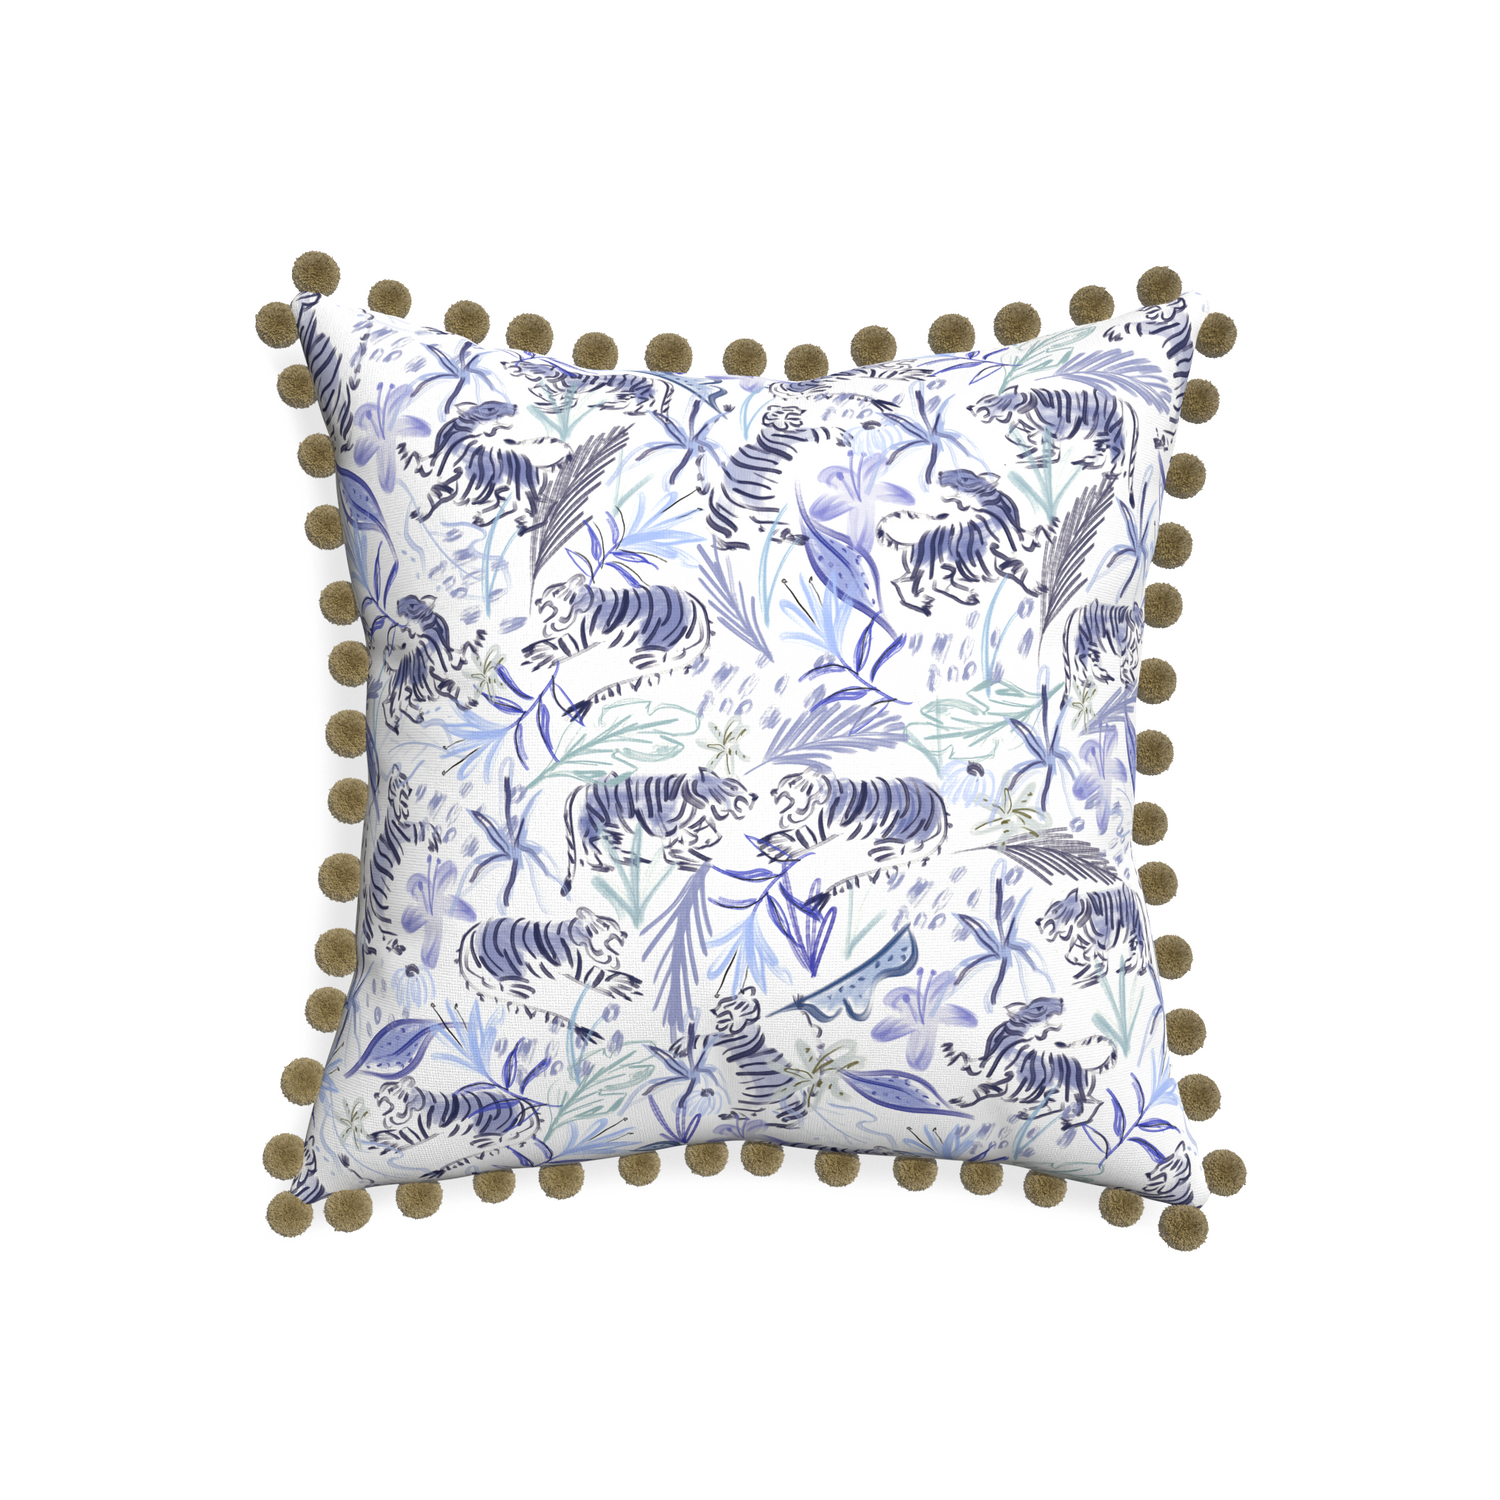 20-square frida blue custom blue with intricate tiger designpillow with olive pom pom on white background